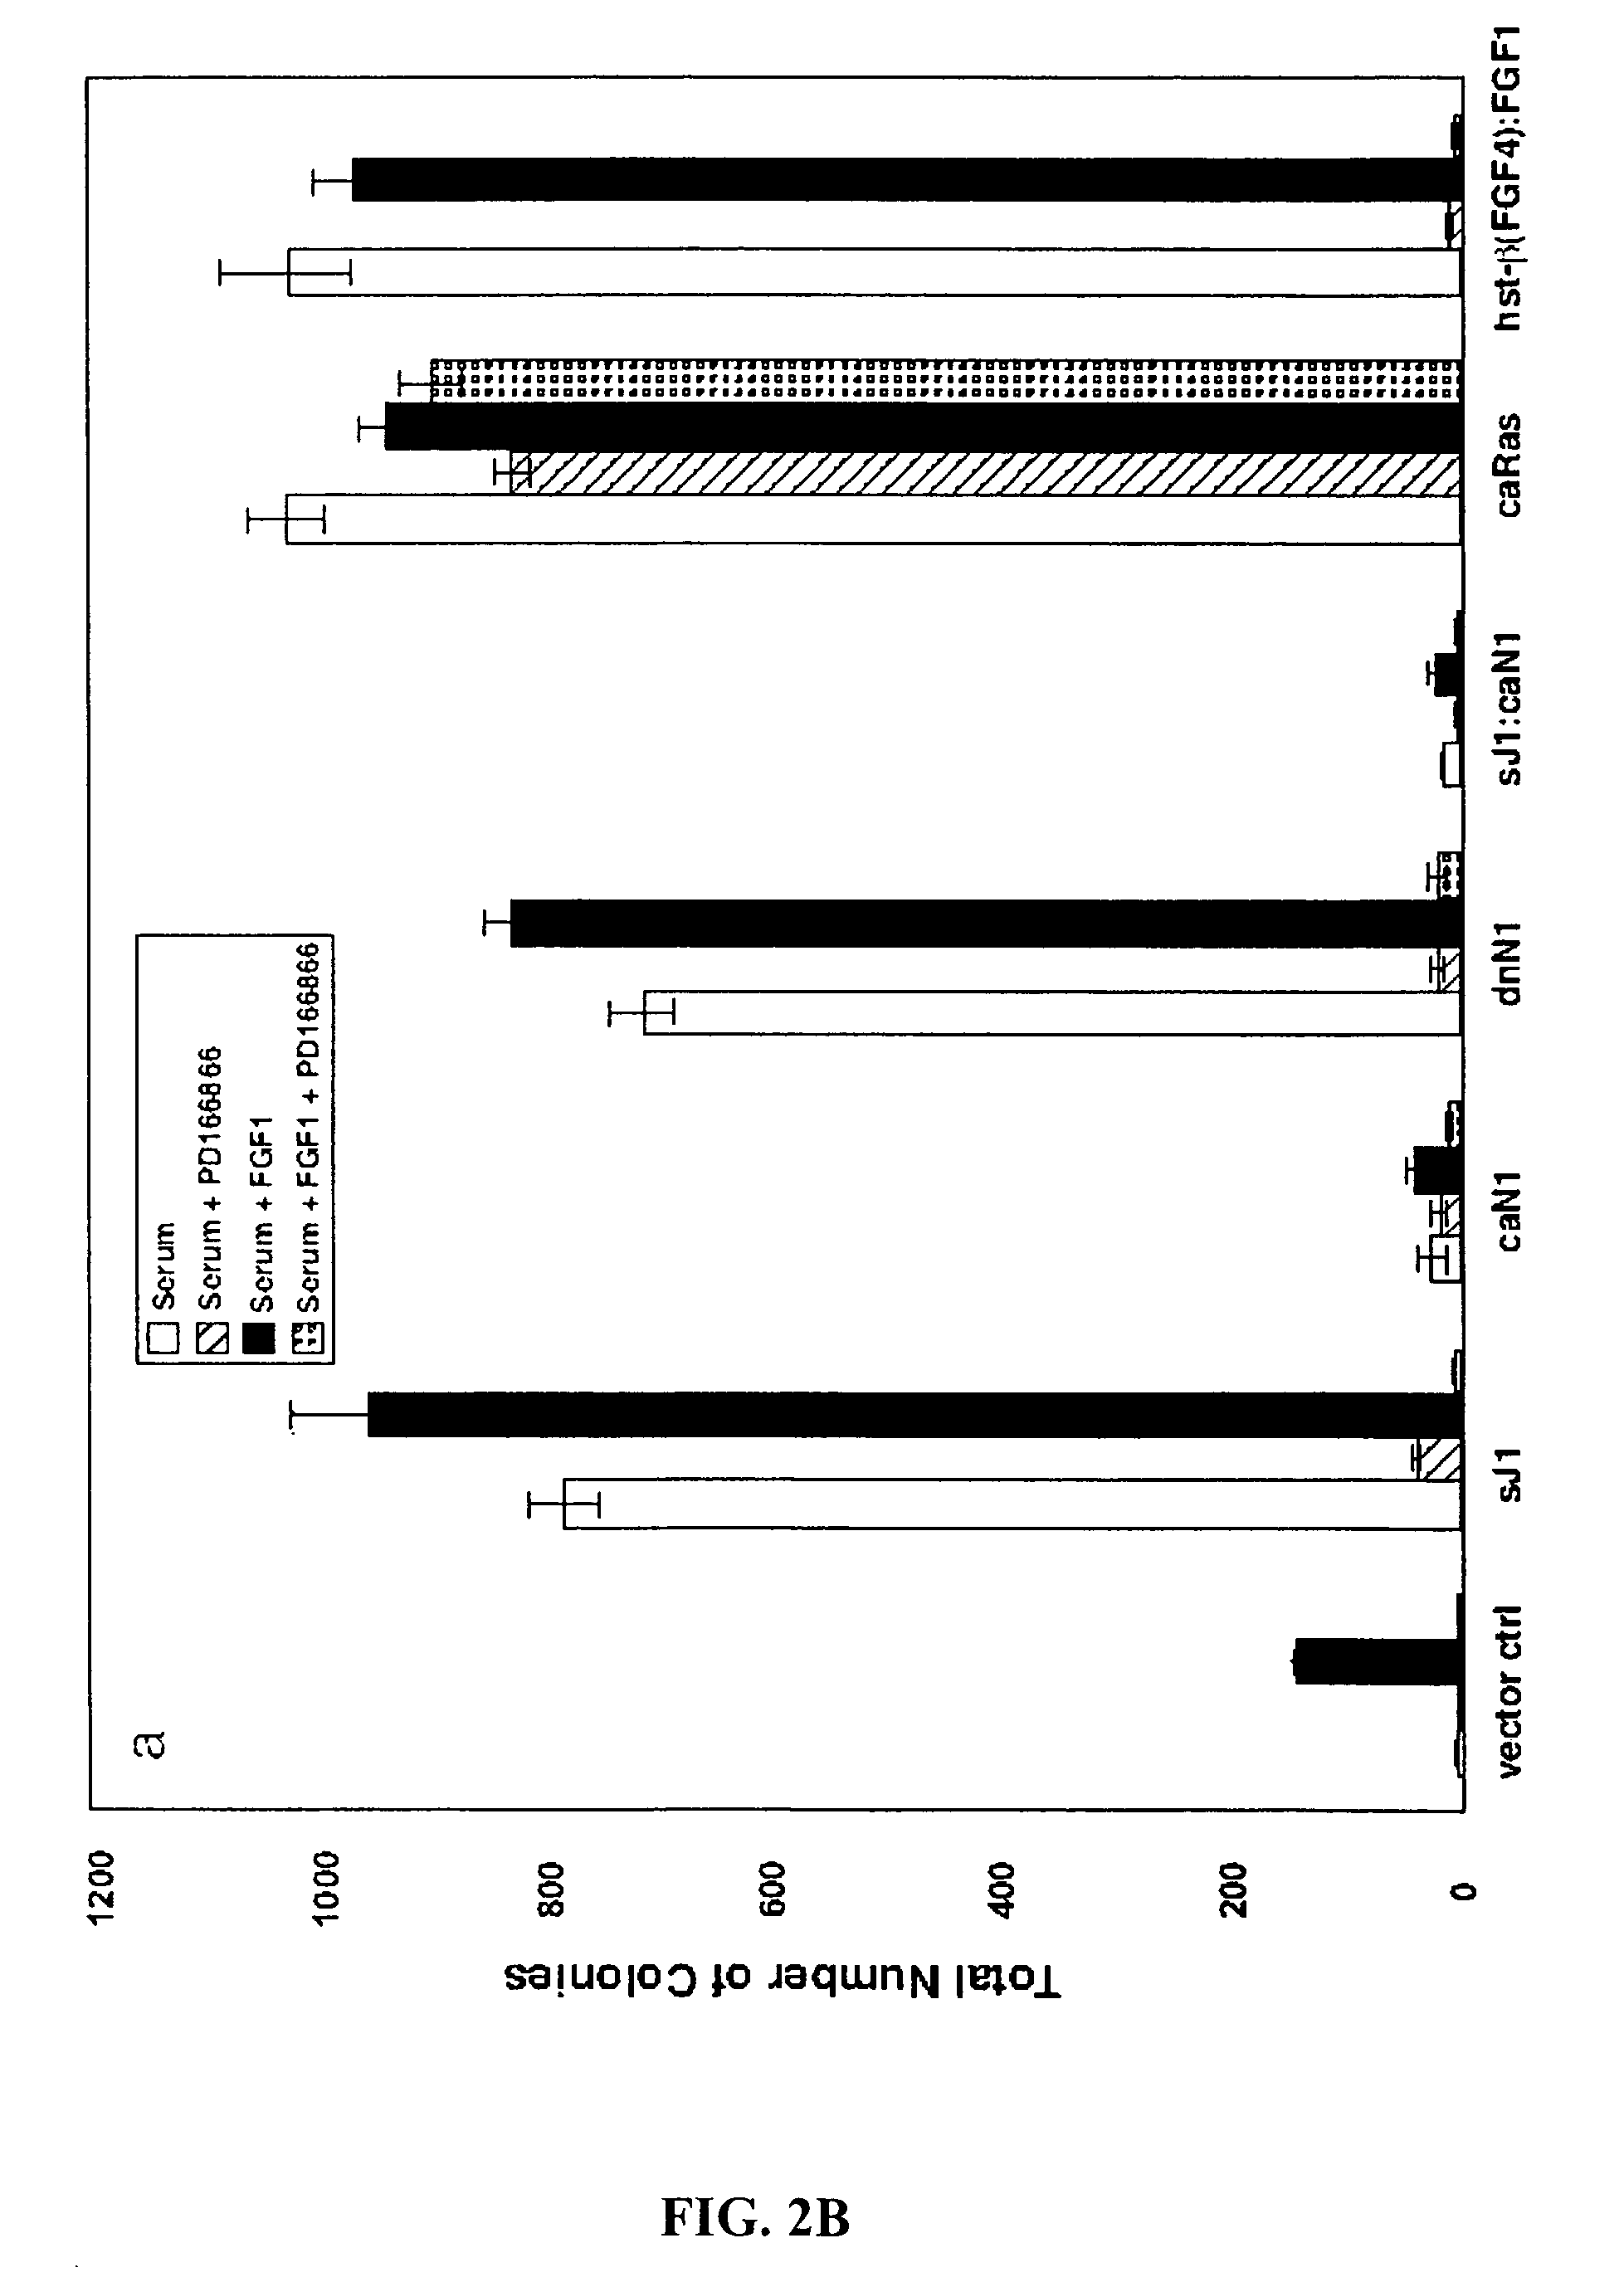 Compositions, methods and kits related to thrombin, Notch signaling and stamatogenesis and growth of stem cells